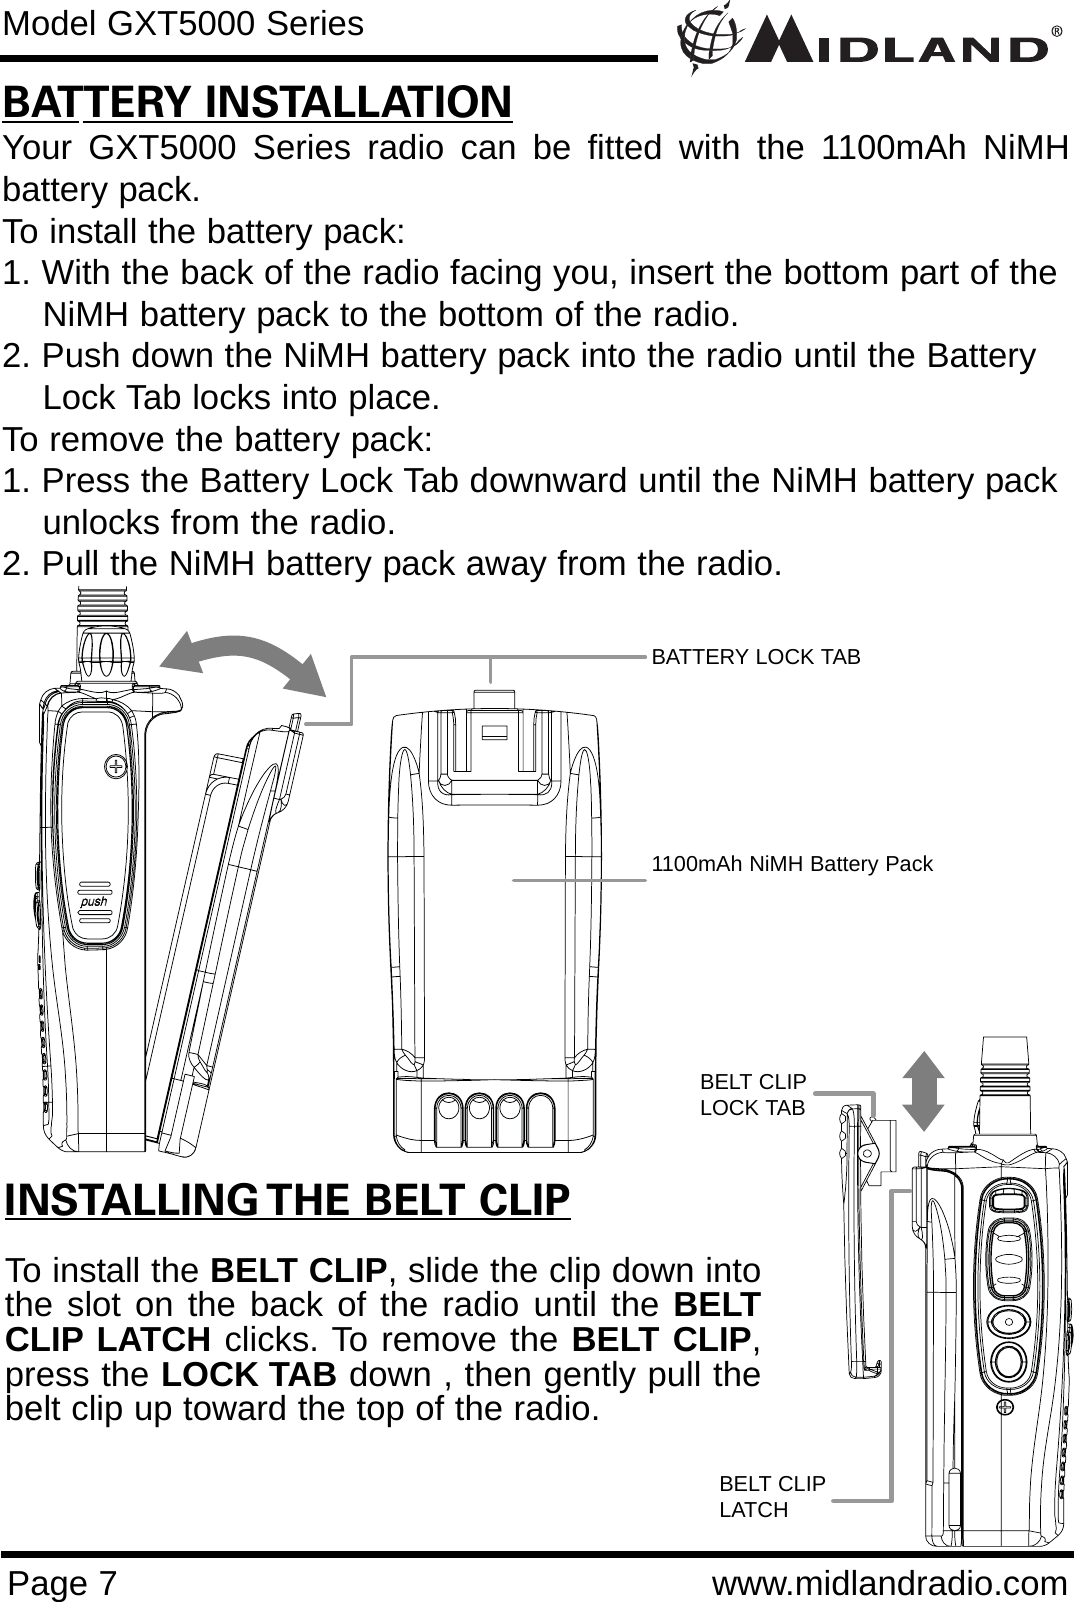 Page 7 www.midlandradio.comBATTERY INSTALLATIONYour GXT5000 Series radio can be fitted with the 1100mAh NiMHbattery pack.  To install the battery pack:1. With the back of the radio facing you, insert the bottom part of the NiMH battery pack to the bottom of the radio.2. Push down the NiMH battery pack into the radio until the Battery Lock Tab locks into place.To remove the battery pack:1. Press the Battery Lock Tab downward until the NiMH battery pack unlocks from the radio.2. Pull the NiMH battery pack away from the radio.Model GXT5000 SeriesINSTALLING THE BELT CLIPTo install the BELT CLIP, slide the clip down intothe slot on the back of the radio until the BELTCLIP LATCH clicks. To remove the BELT CLIP,press the LOCK TAB down , then gently pull thebelt clip up toward the top of the radio.BATTERY LOCK TAB1100mAh NiMH Battery PackBELT CLIPLOCK TABBELT CLIPLATCH